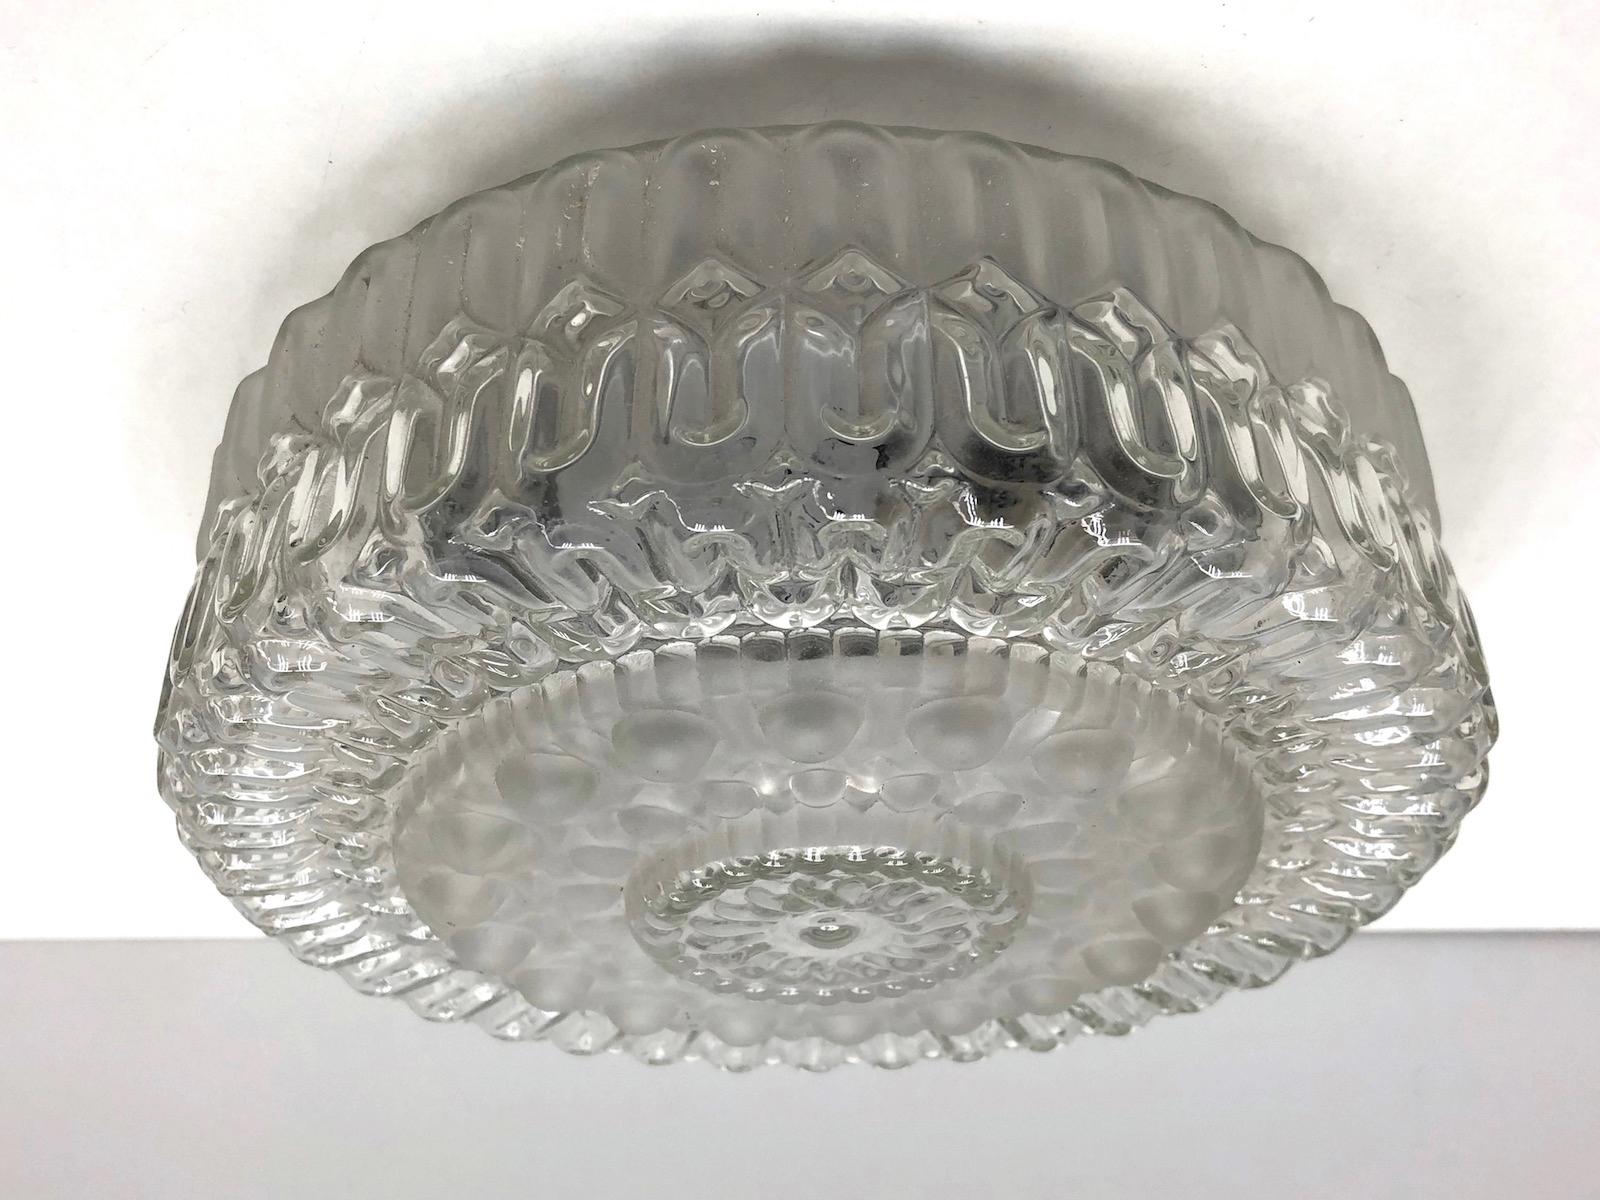 Petite organic bubble pattern flush mount. Gorgeous textured glass flush mount with metal fixture. The fixture requires one European E27 Edison or Medium bulb up to 60 watts. Found on an estate sale in Austria.